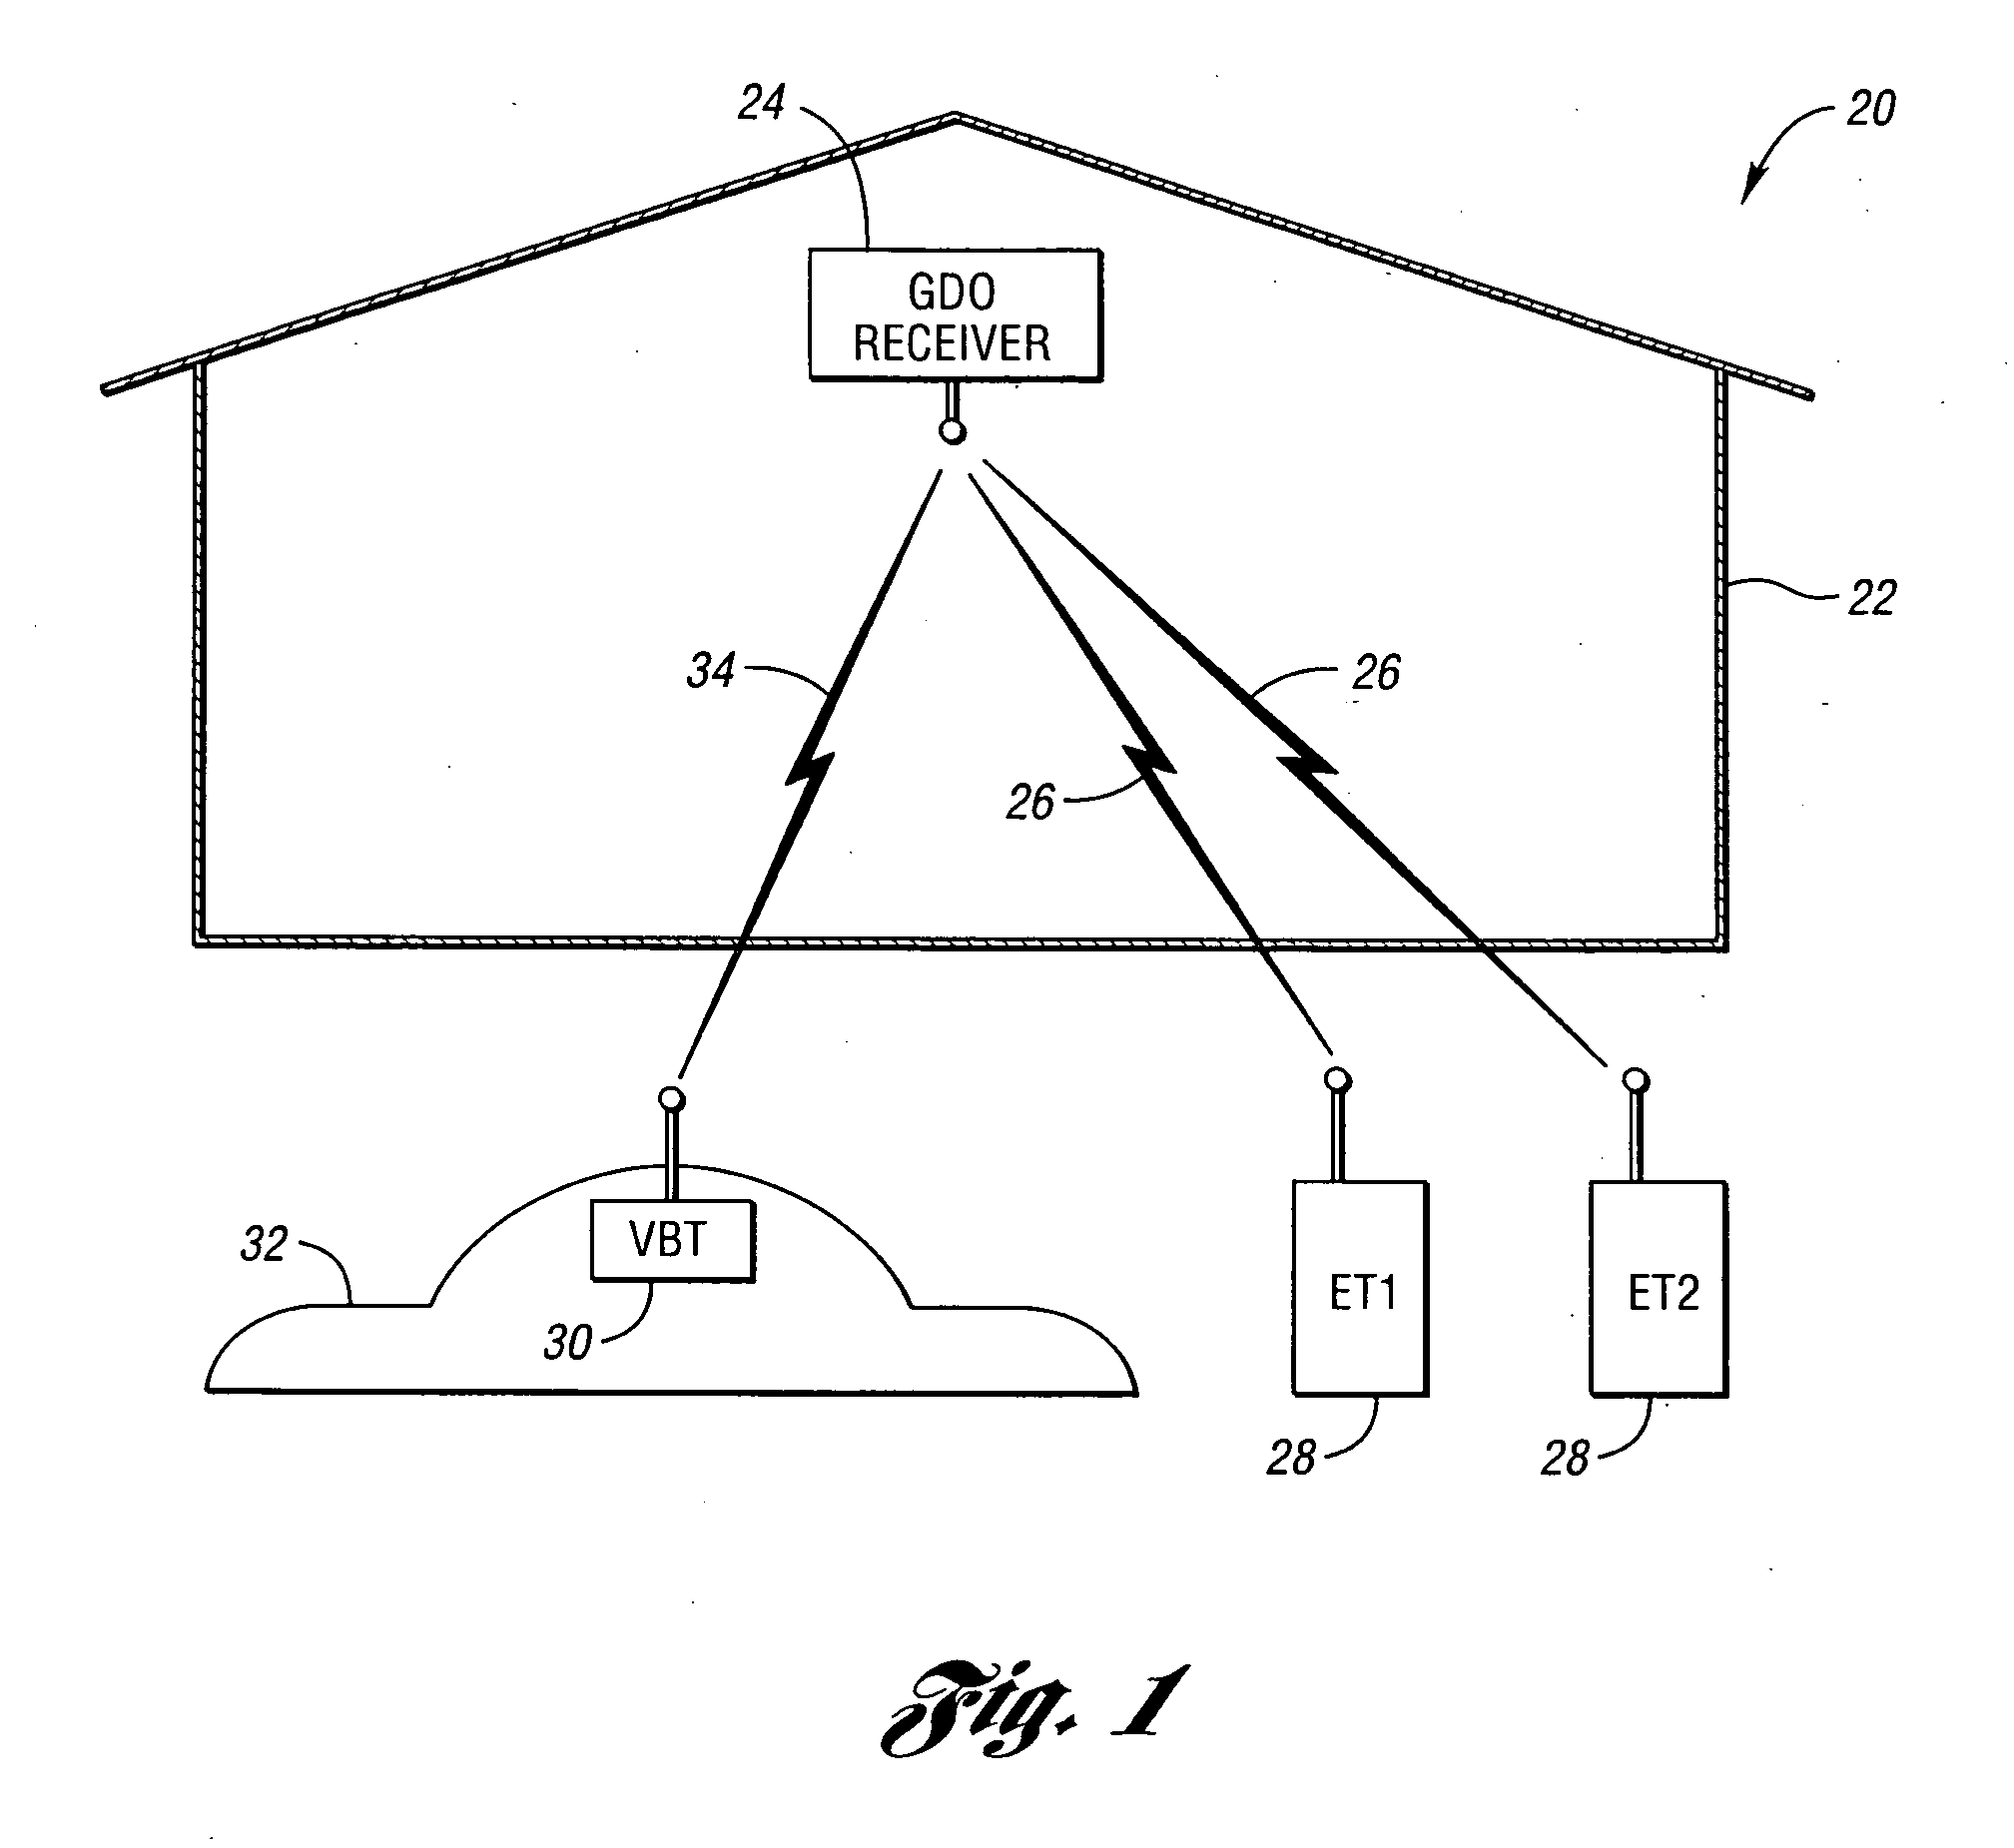 Appliance remote control having separated user control and transmitter modules remotely located from and directly connected to one another